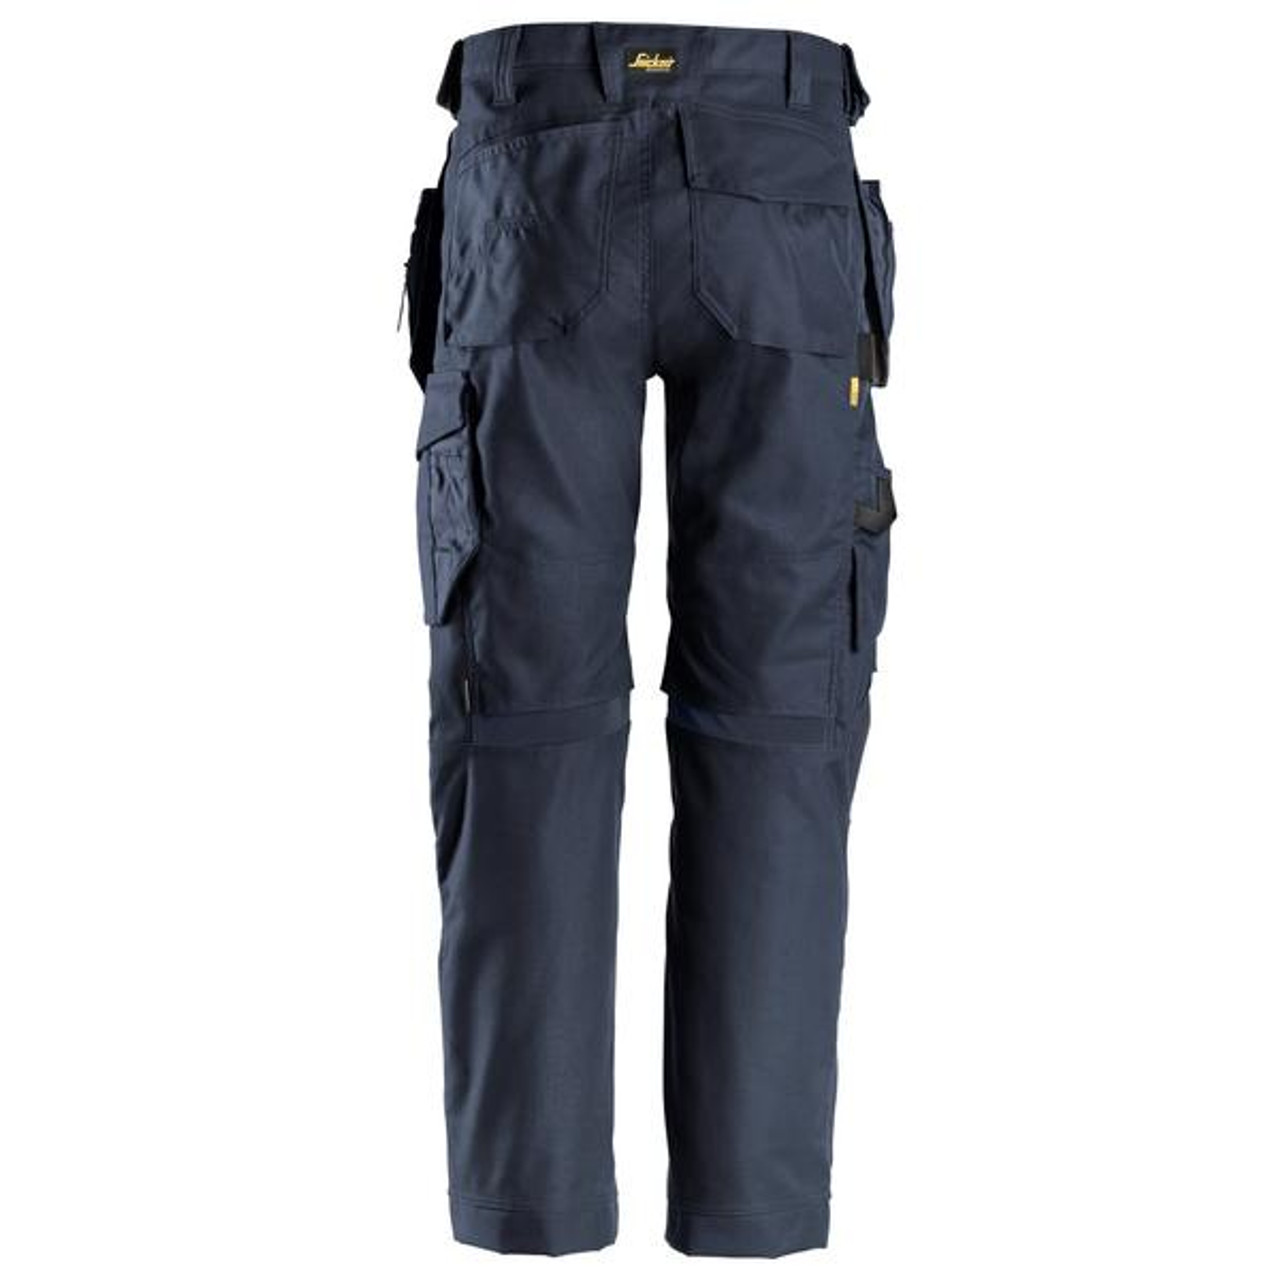 Suitable work Trousers available in Australia and New Zealand SNICKERS Canvas with Stretch Mid Grey Trousers for Carpenters